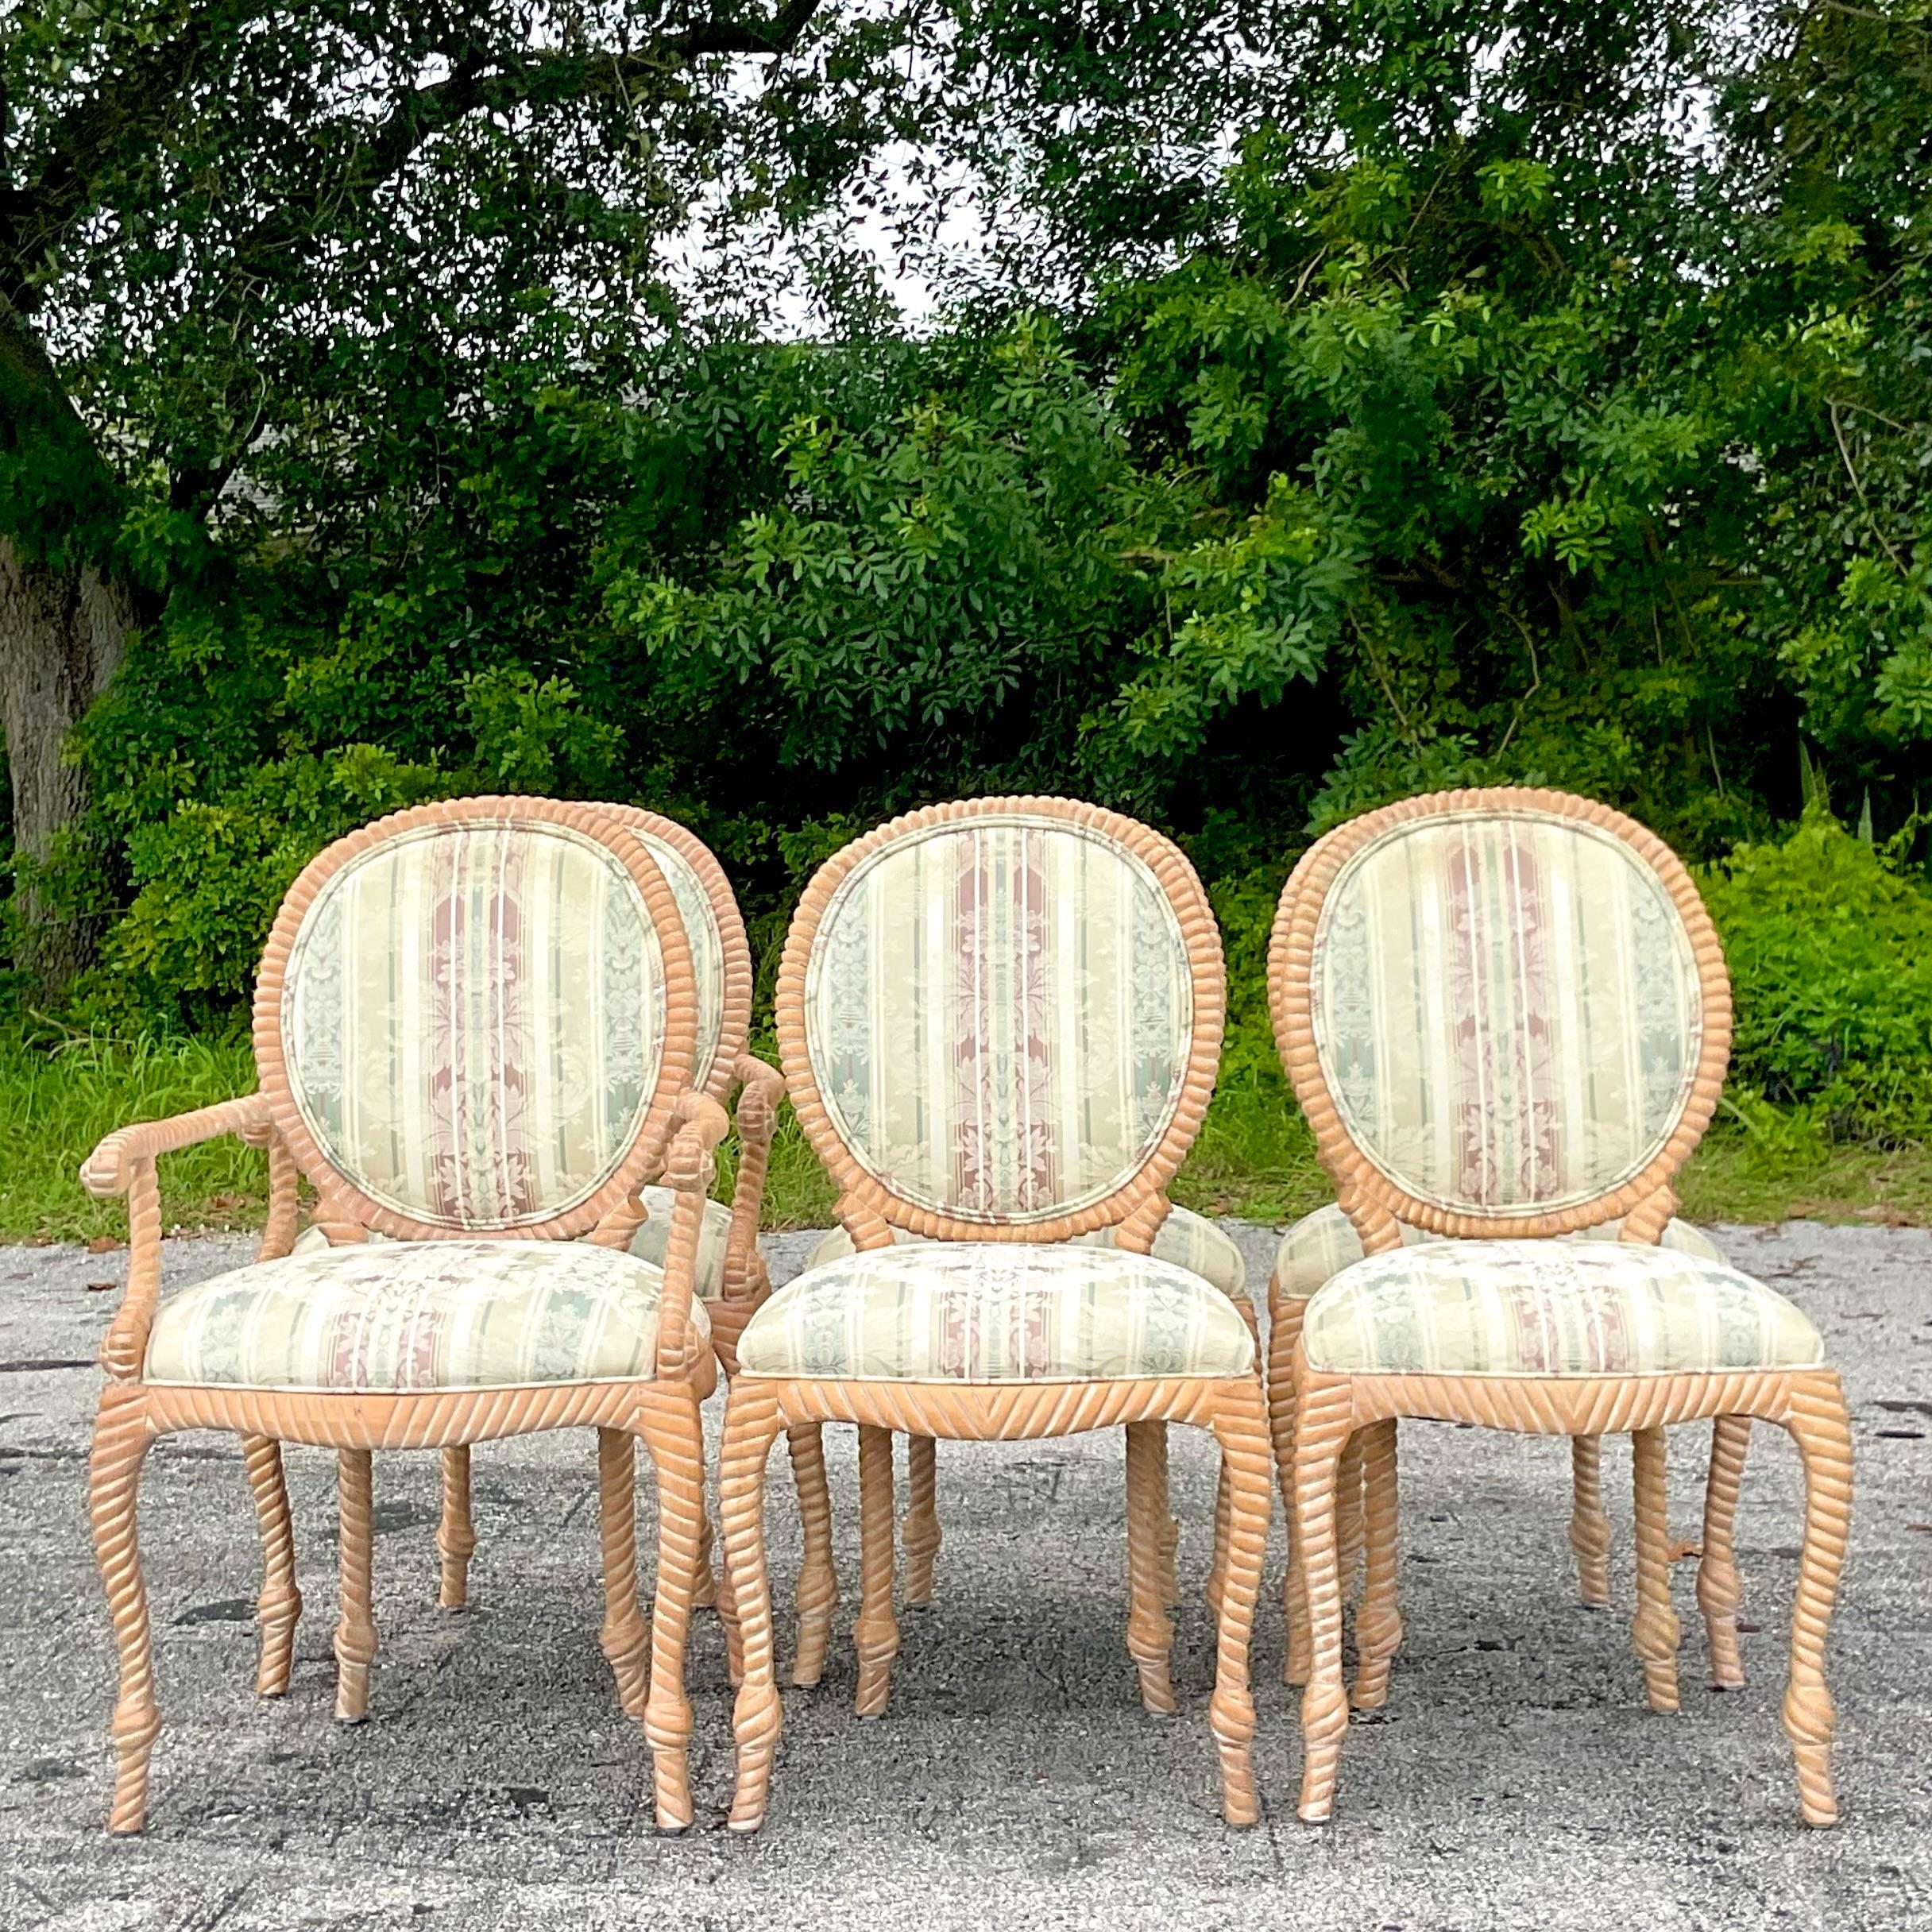 Bohemian Vintage Boho Spanish Carved Rope Dining Chairs - Set of 6